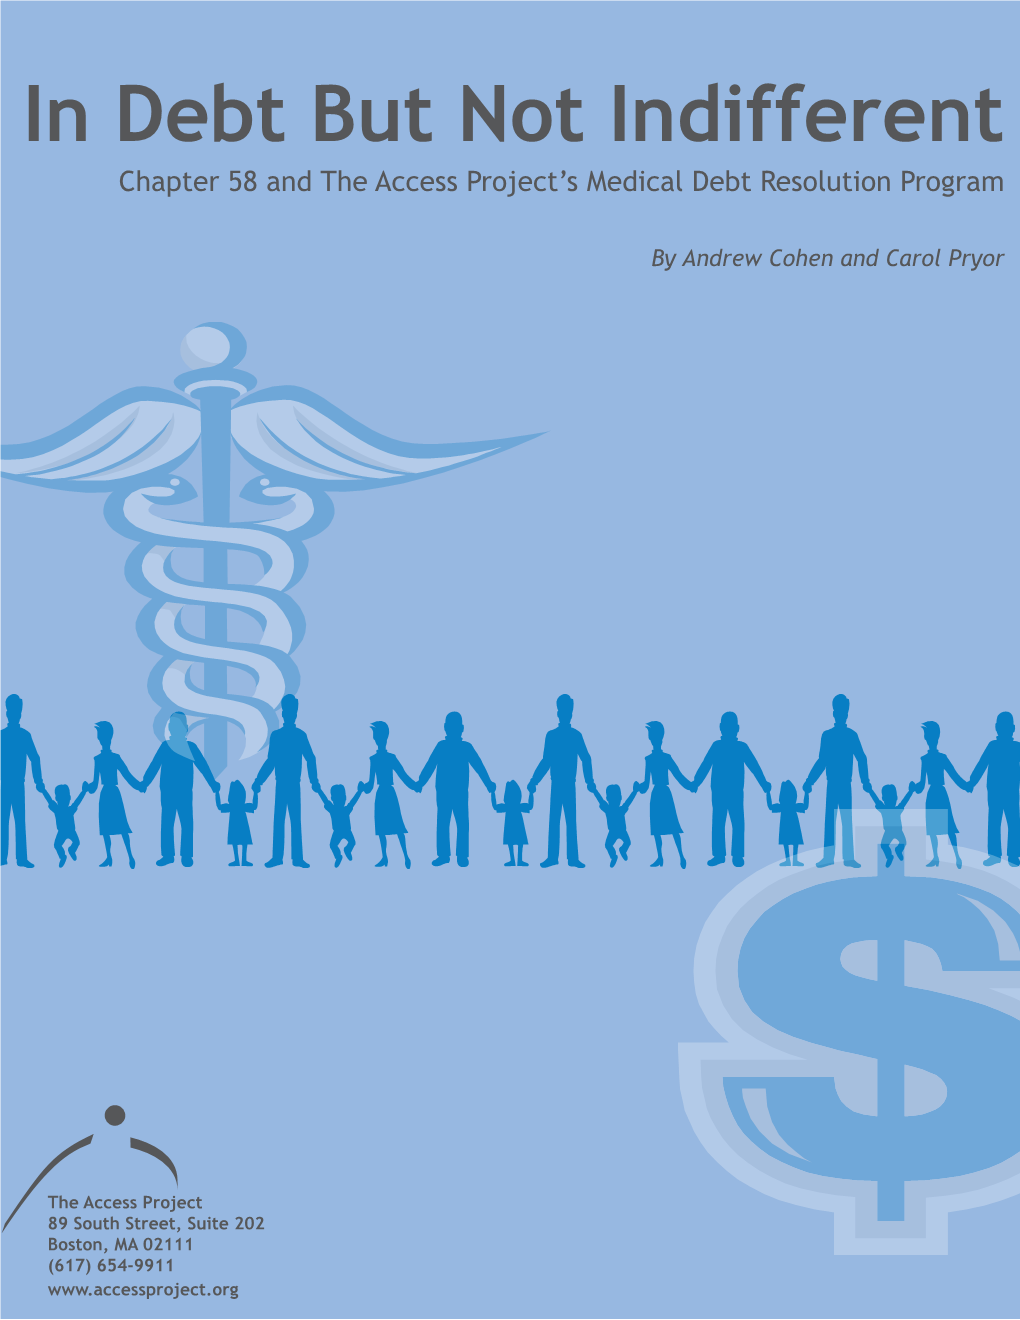 In Debt but Not Indifferent: the Access Project's Medical Debt Resolution Program